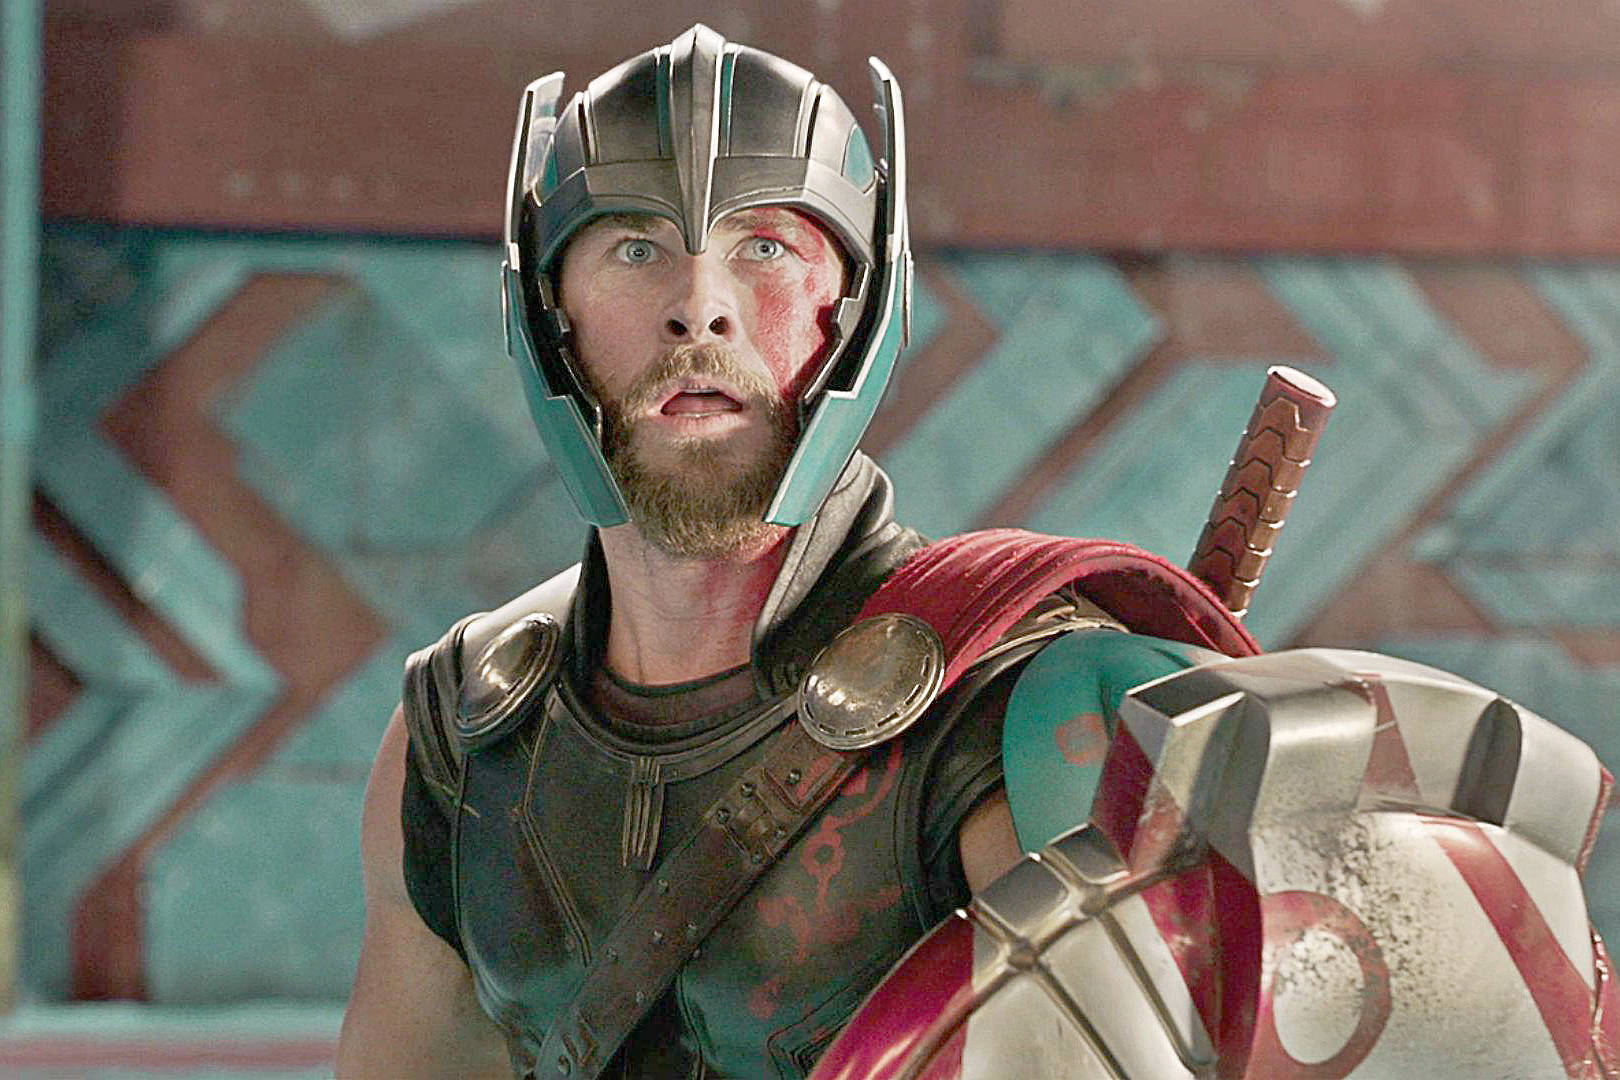 ‘Thor: Ragnarok’ Weds Humor and the Hammer